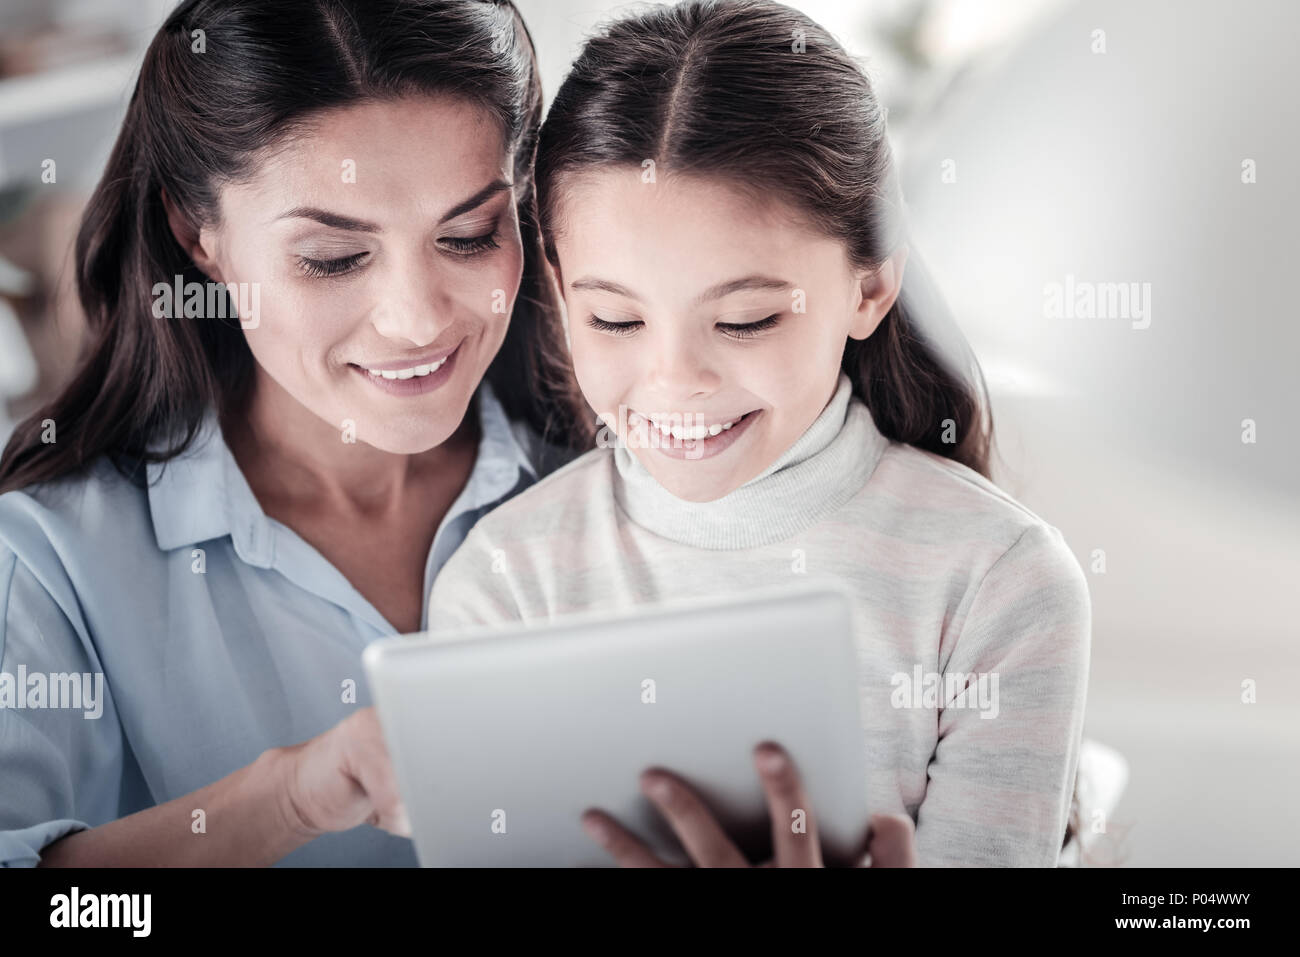 Portrait of delighted girl that staring at tablet Stock Photo